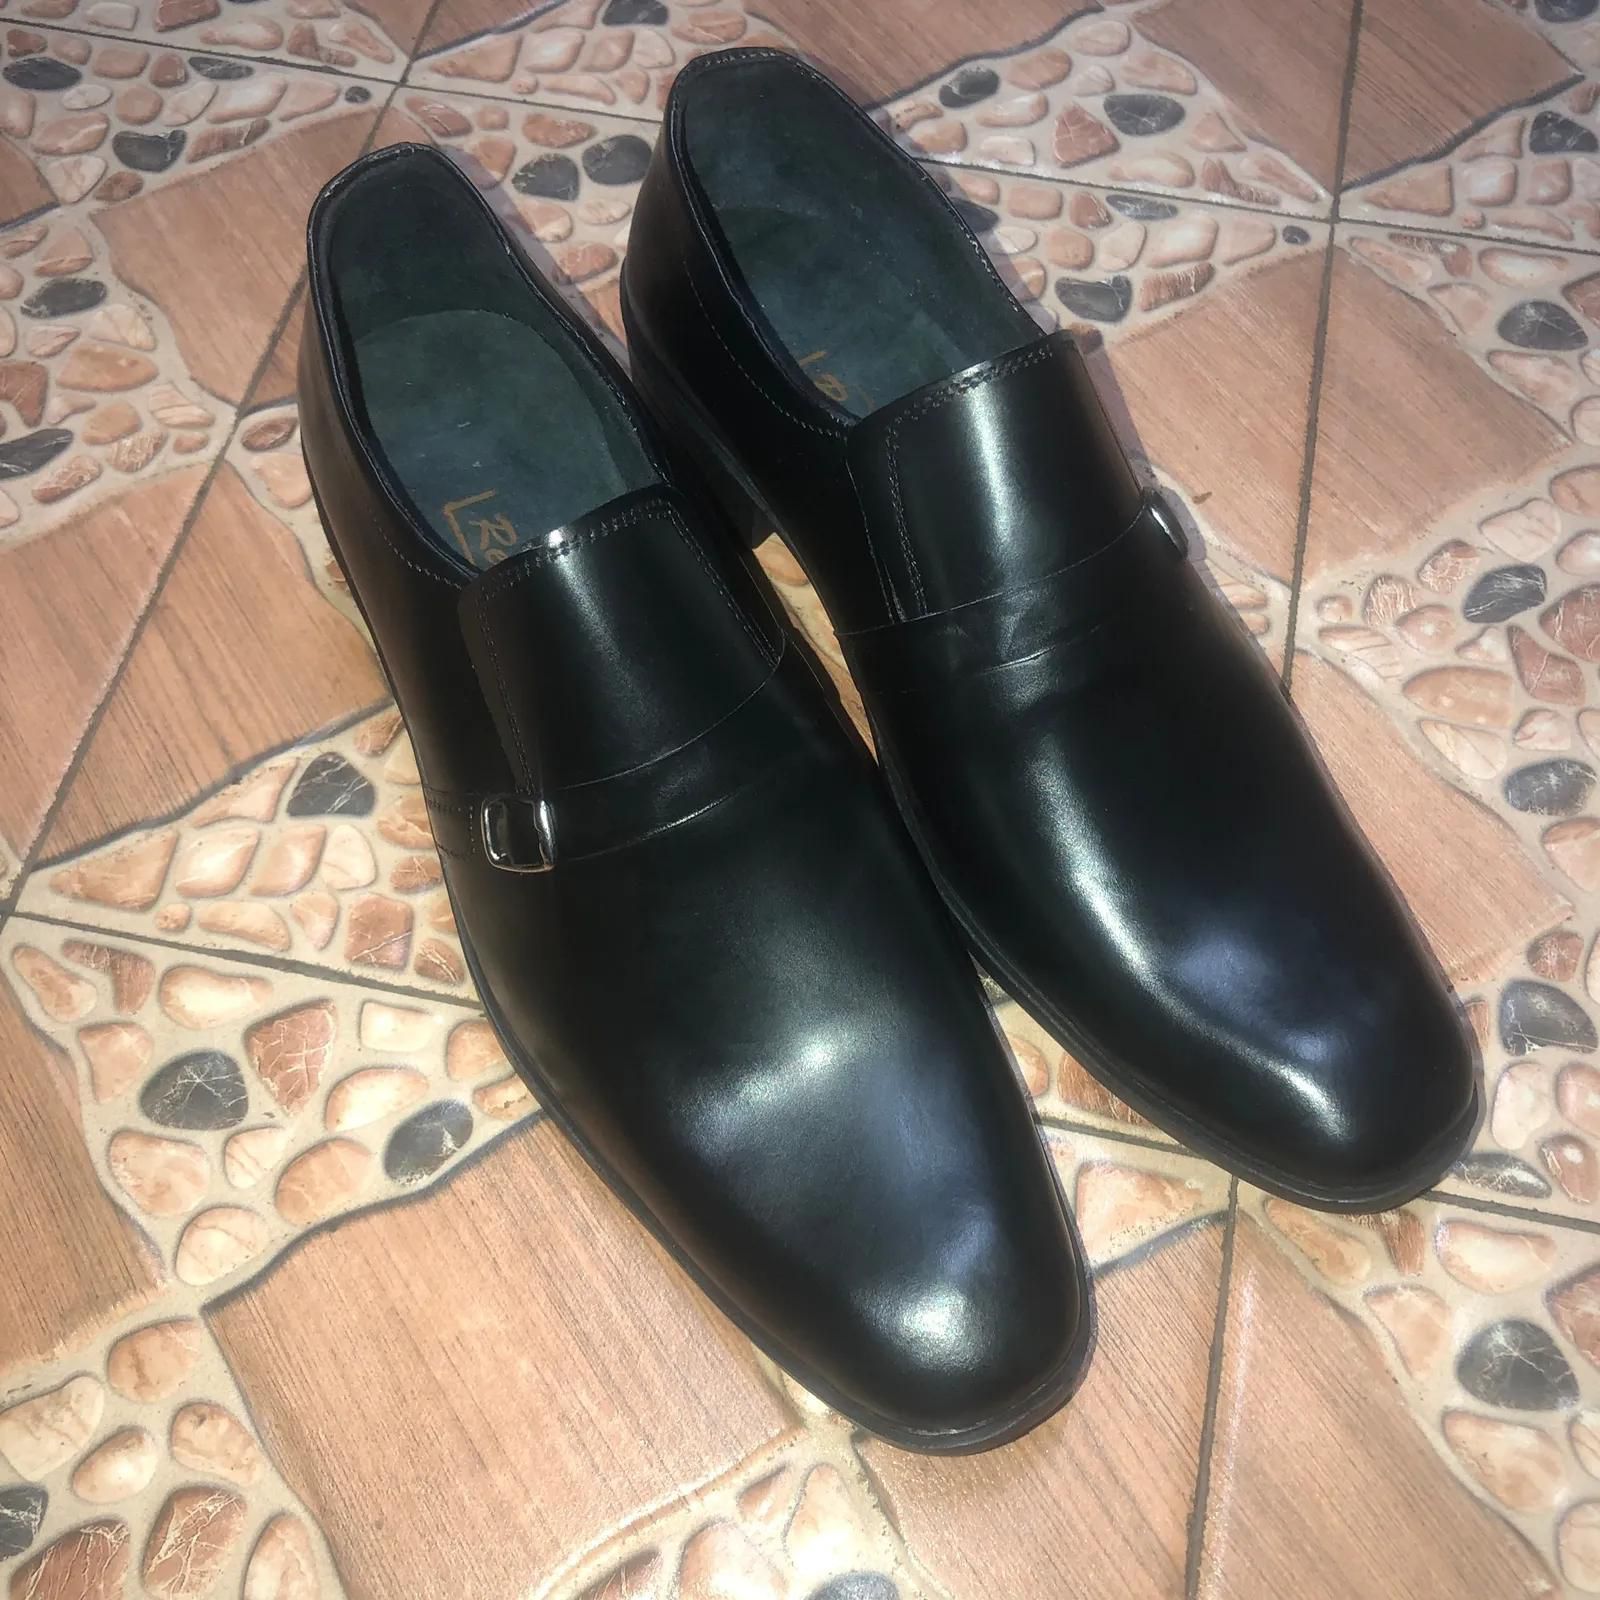 Black official leather shoes.